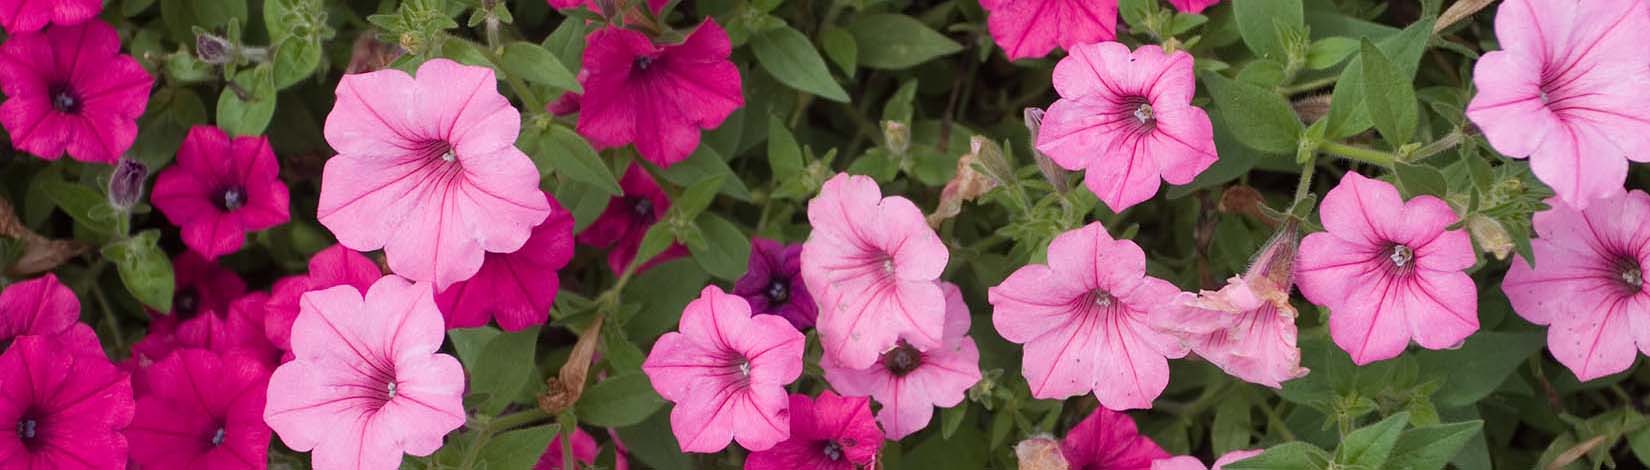 Petunias are an example of annual flowers in Florida